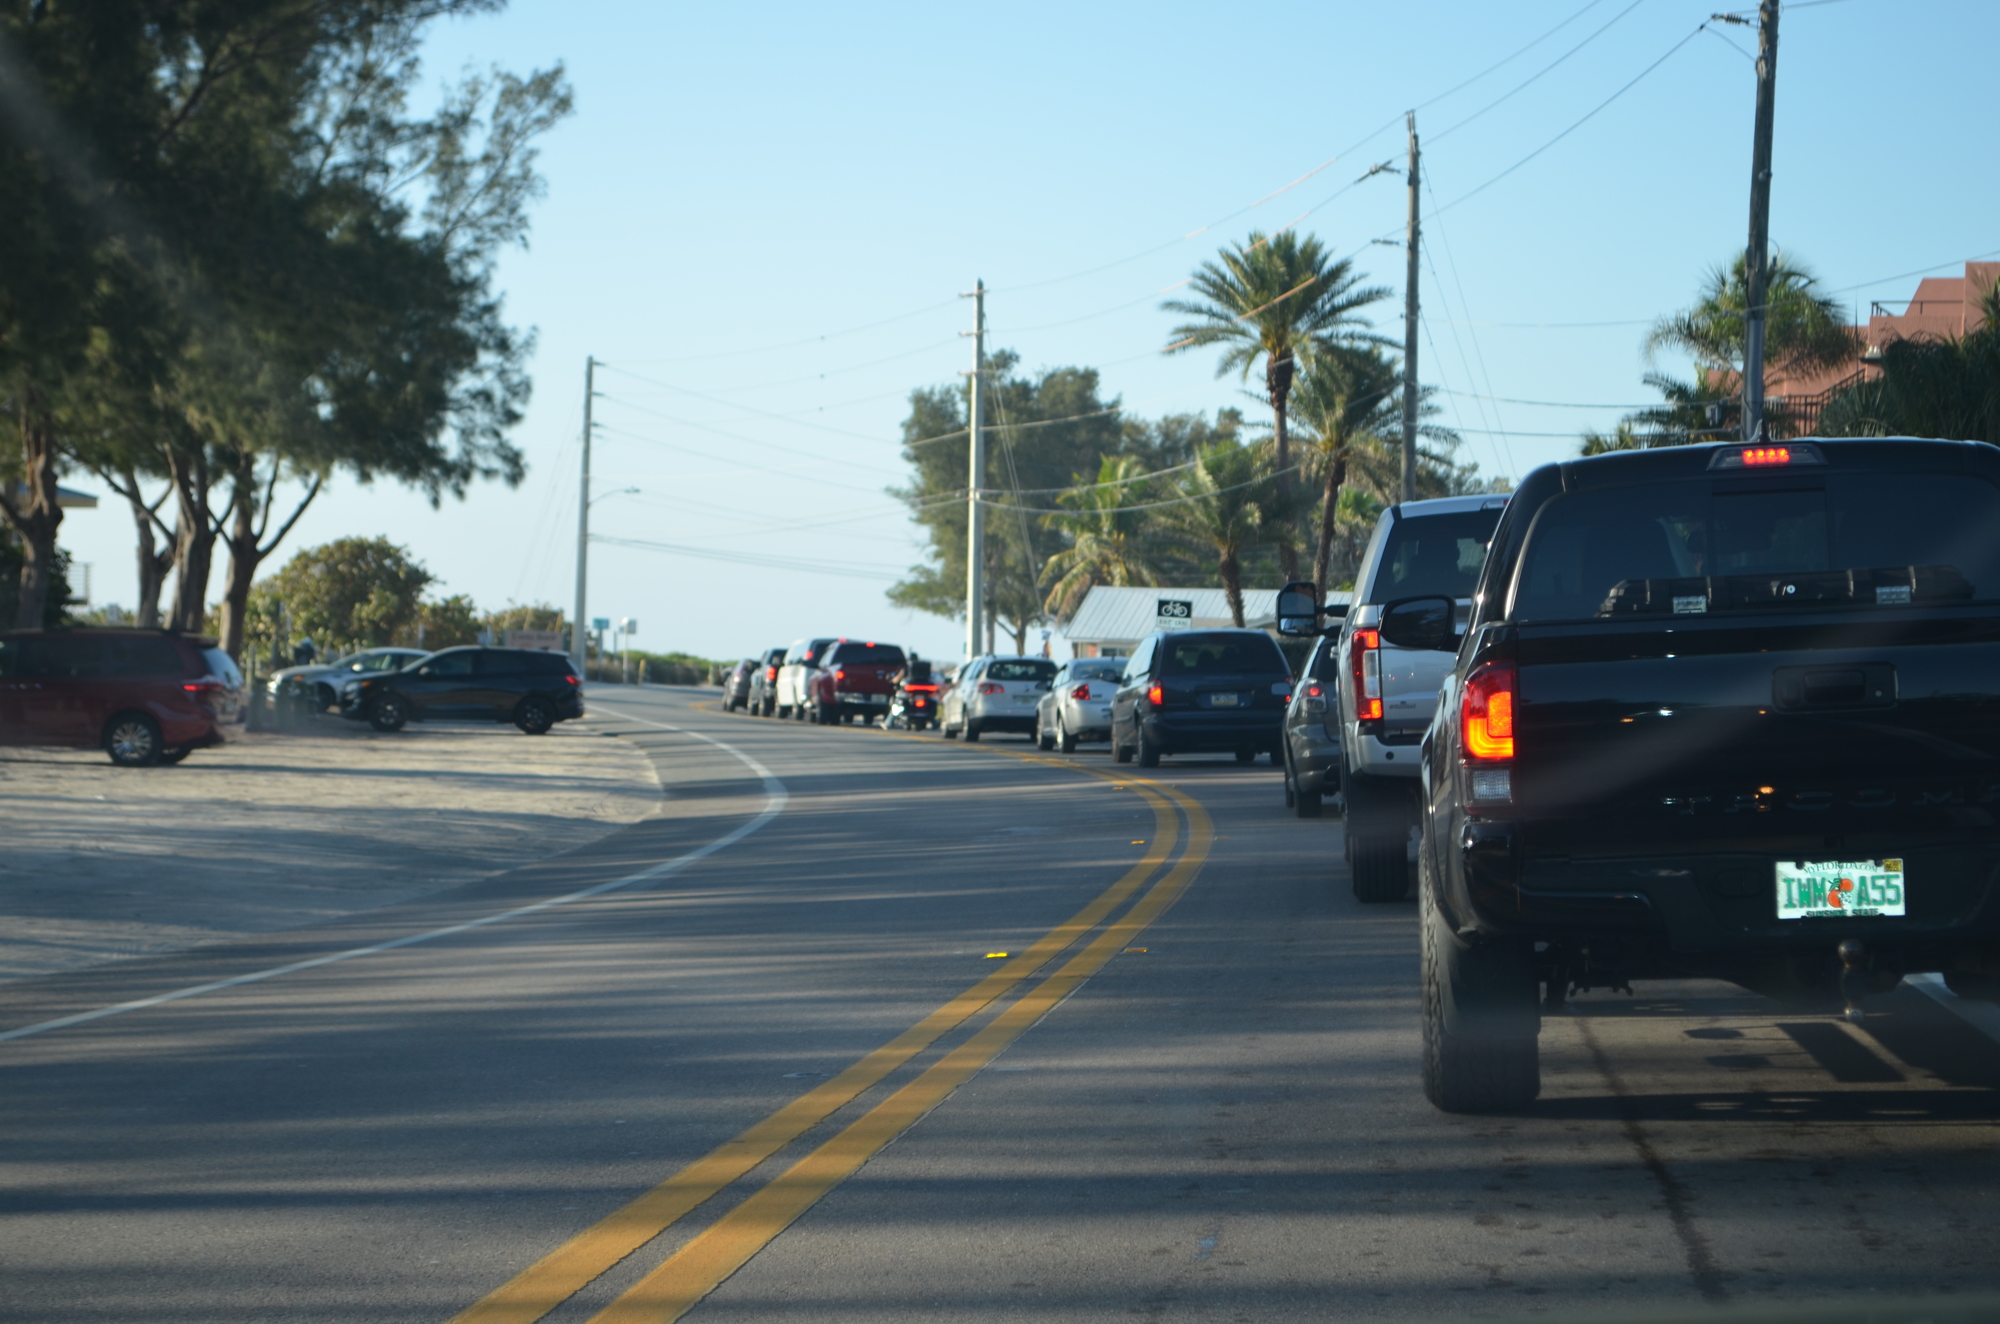 Brake lights along the way, just south of Cortez Road. 5:03 pm